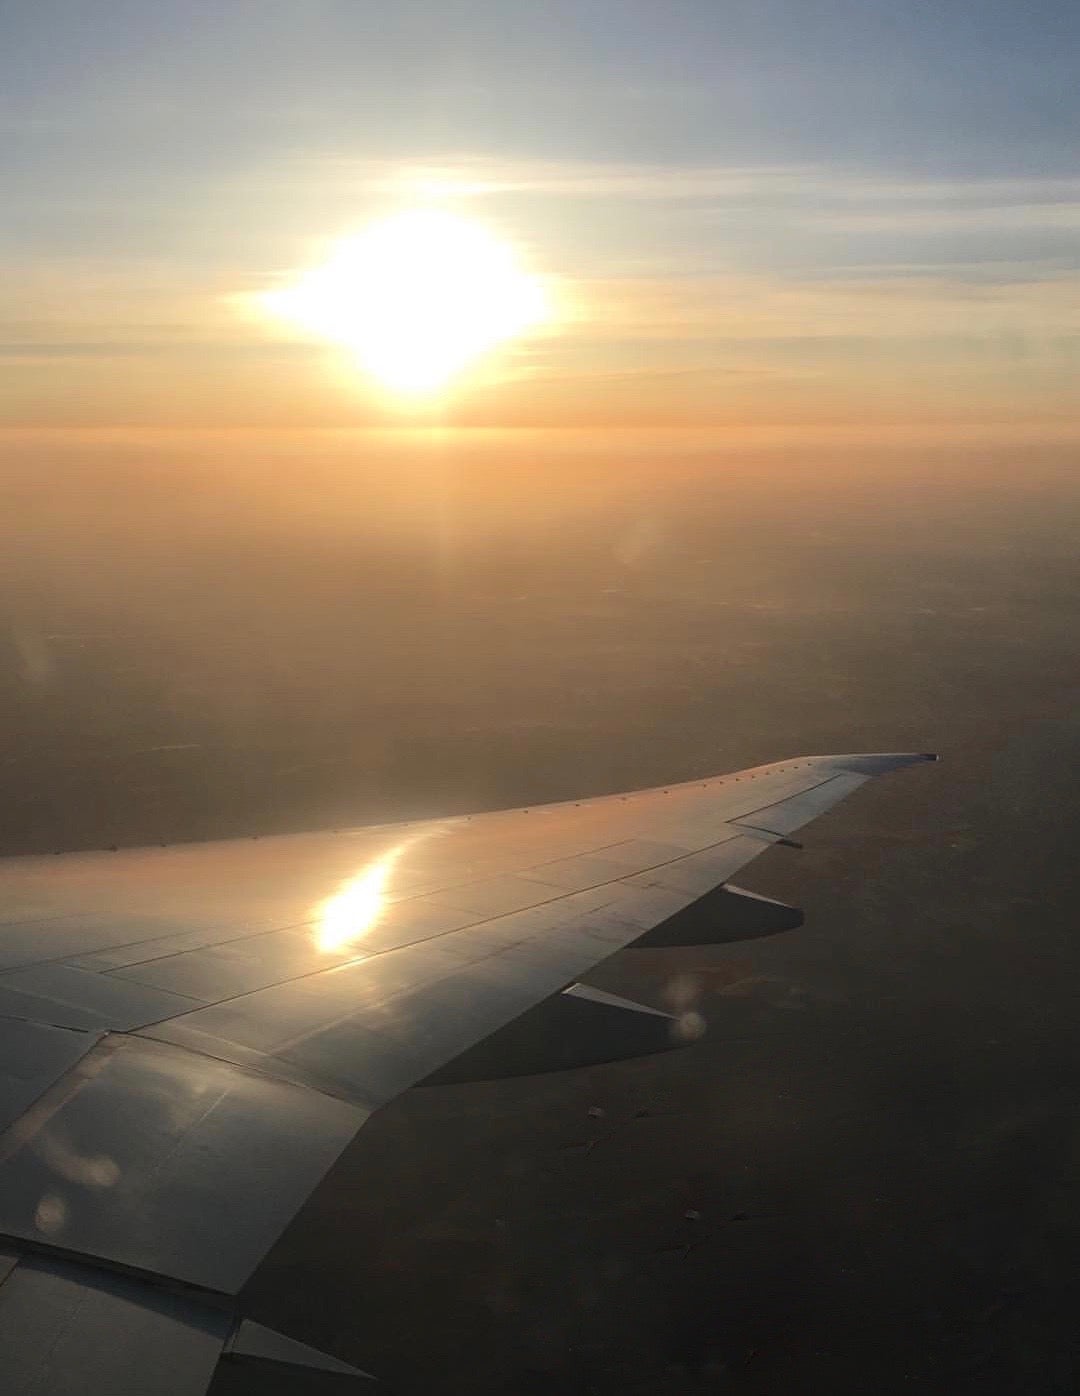 Airplane wing underneath the sunrise